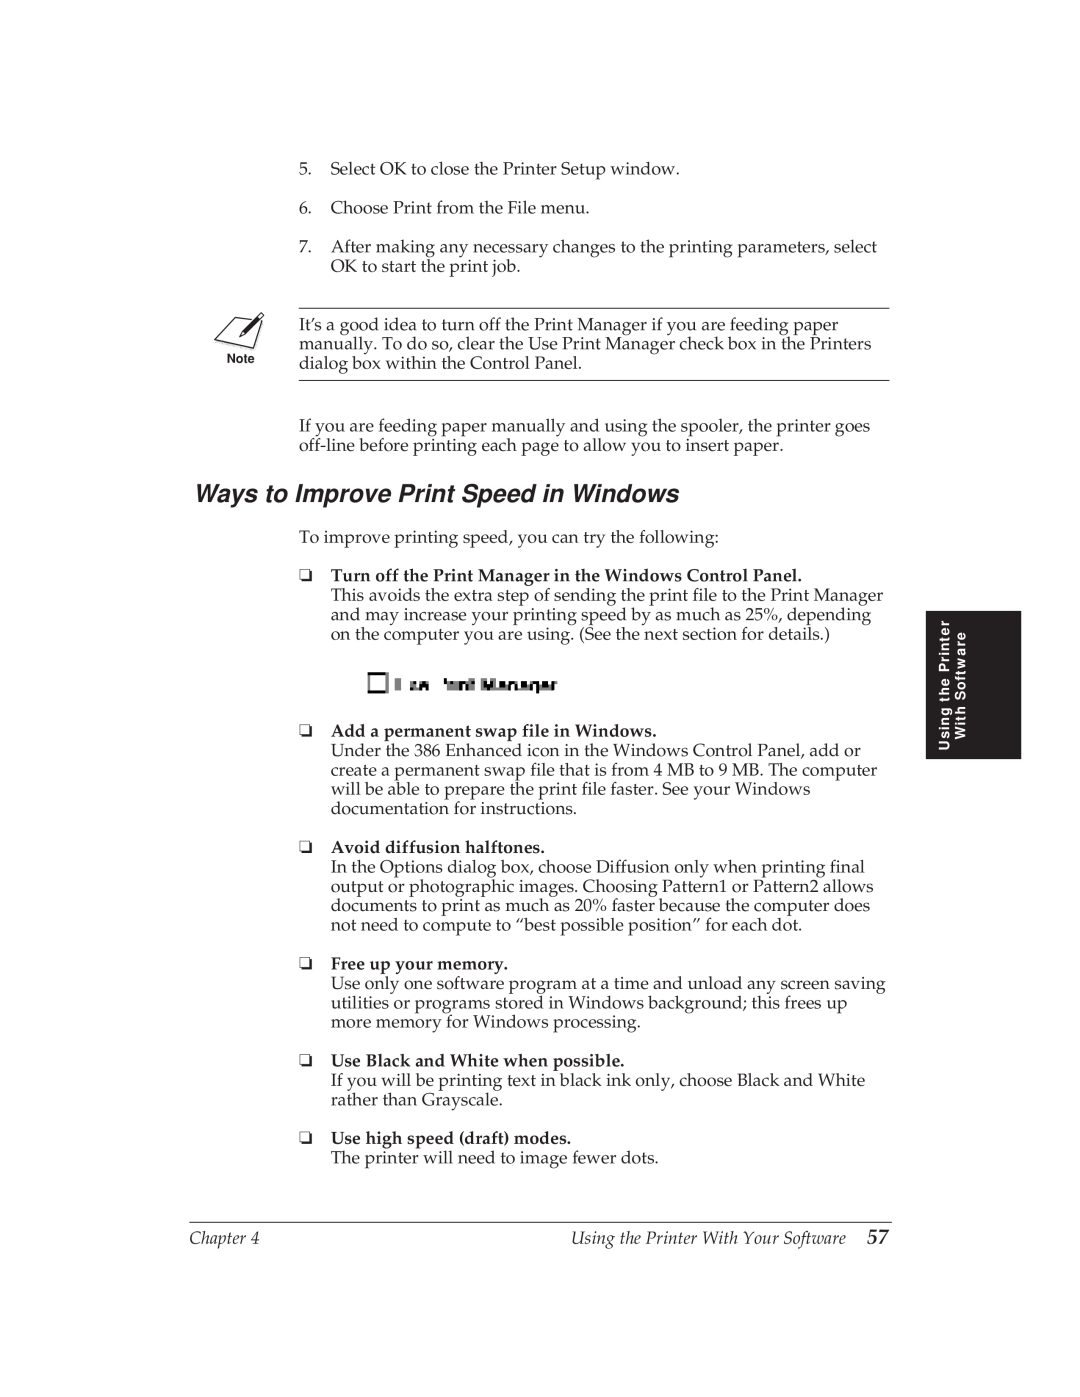 Canon BJ-30 manual Ways to Improve Print Speed in Windows, Turn off the Print Manager in the Windows Control Panel 